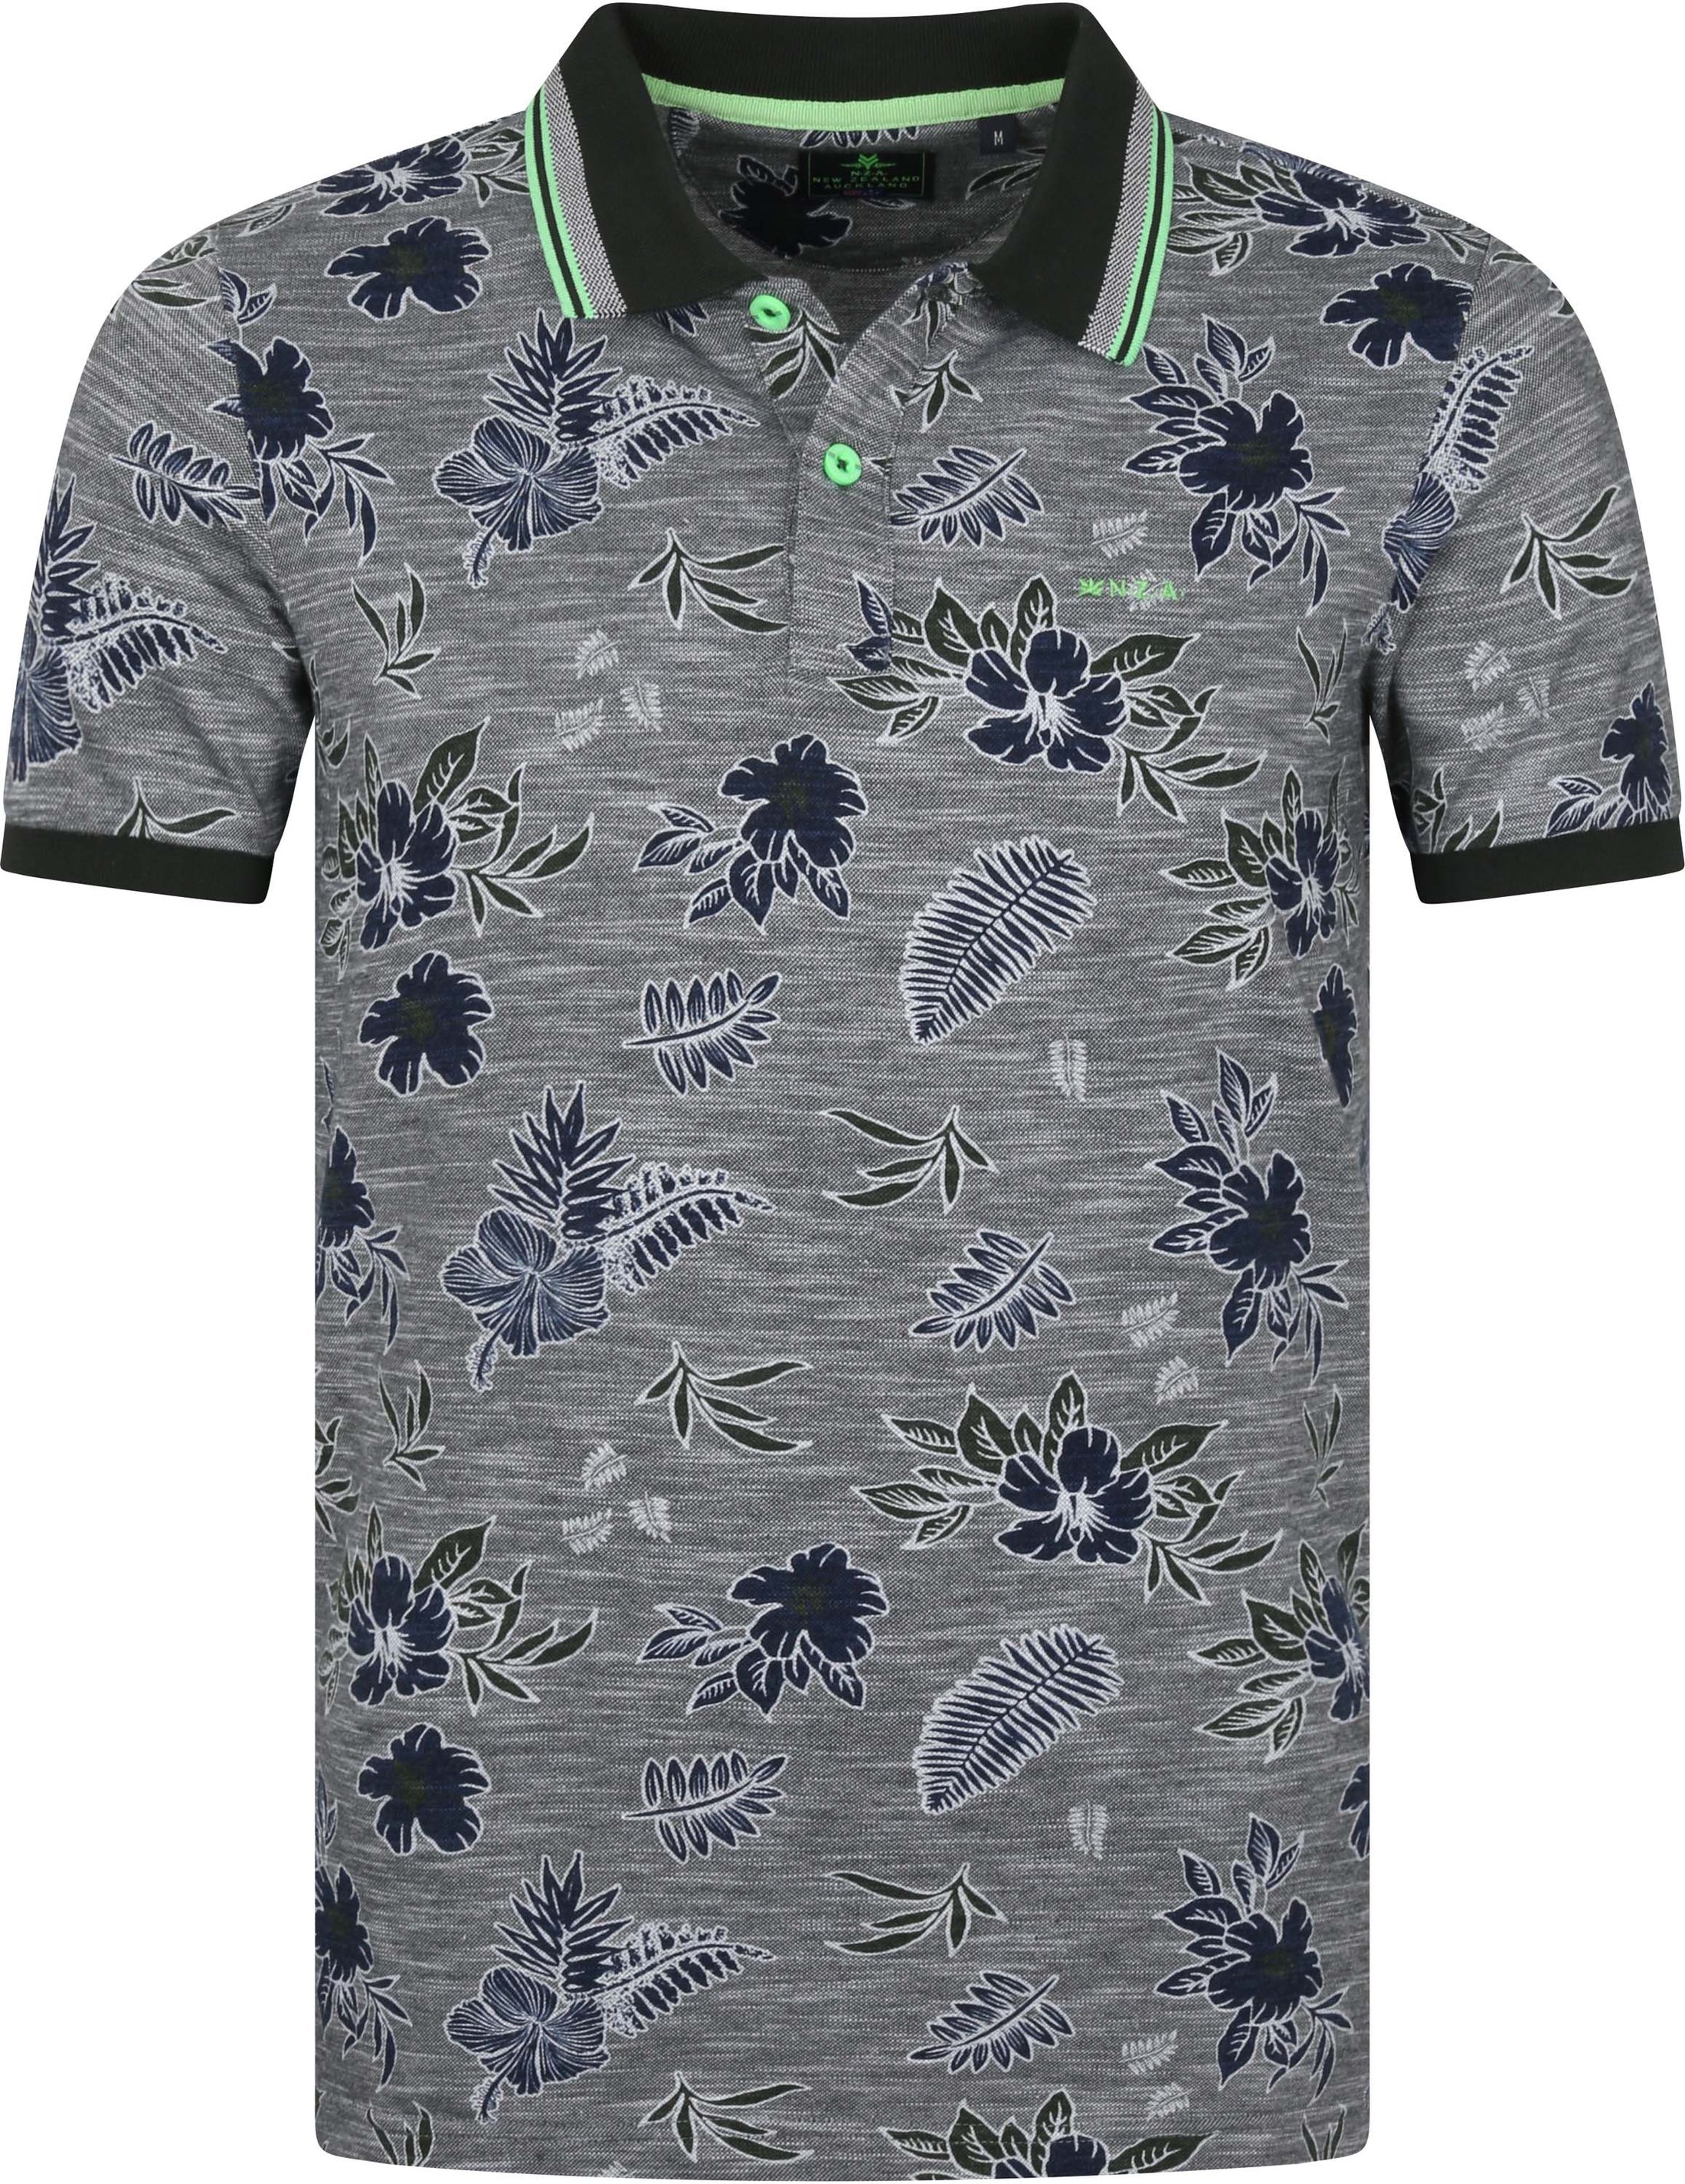 NZA Polo Shirt Normanby Printed Green Grey size L